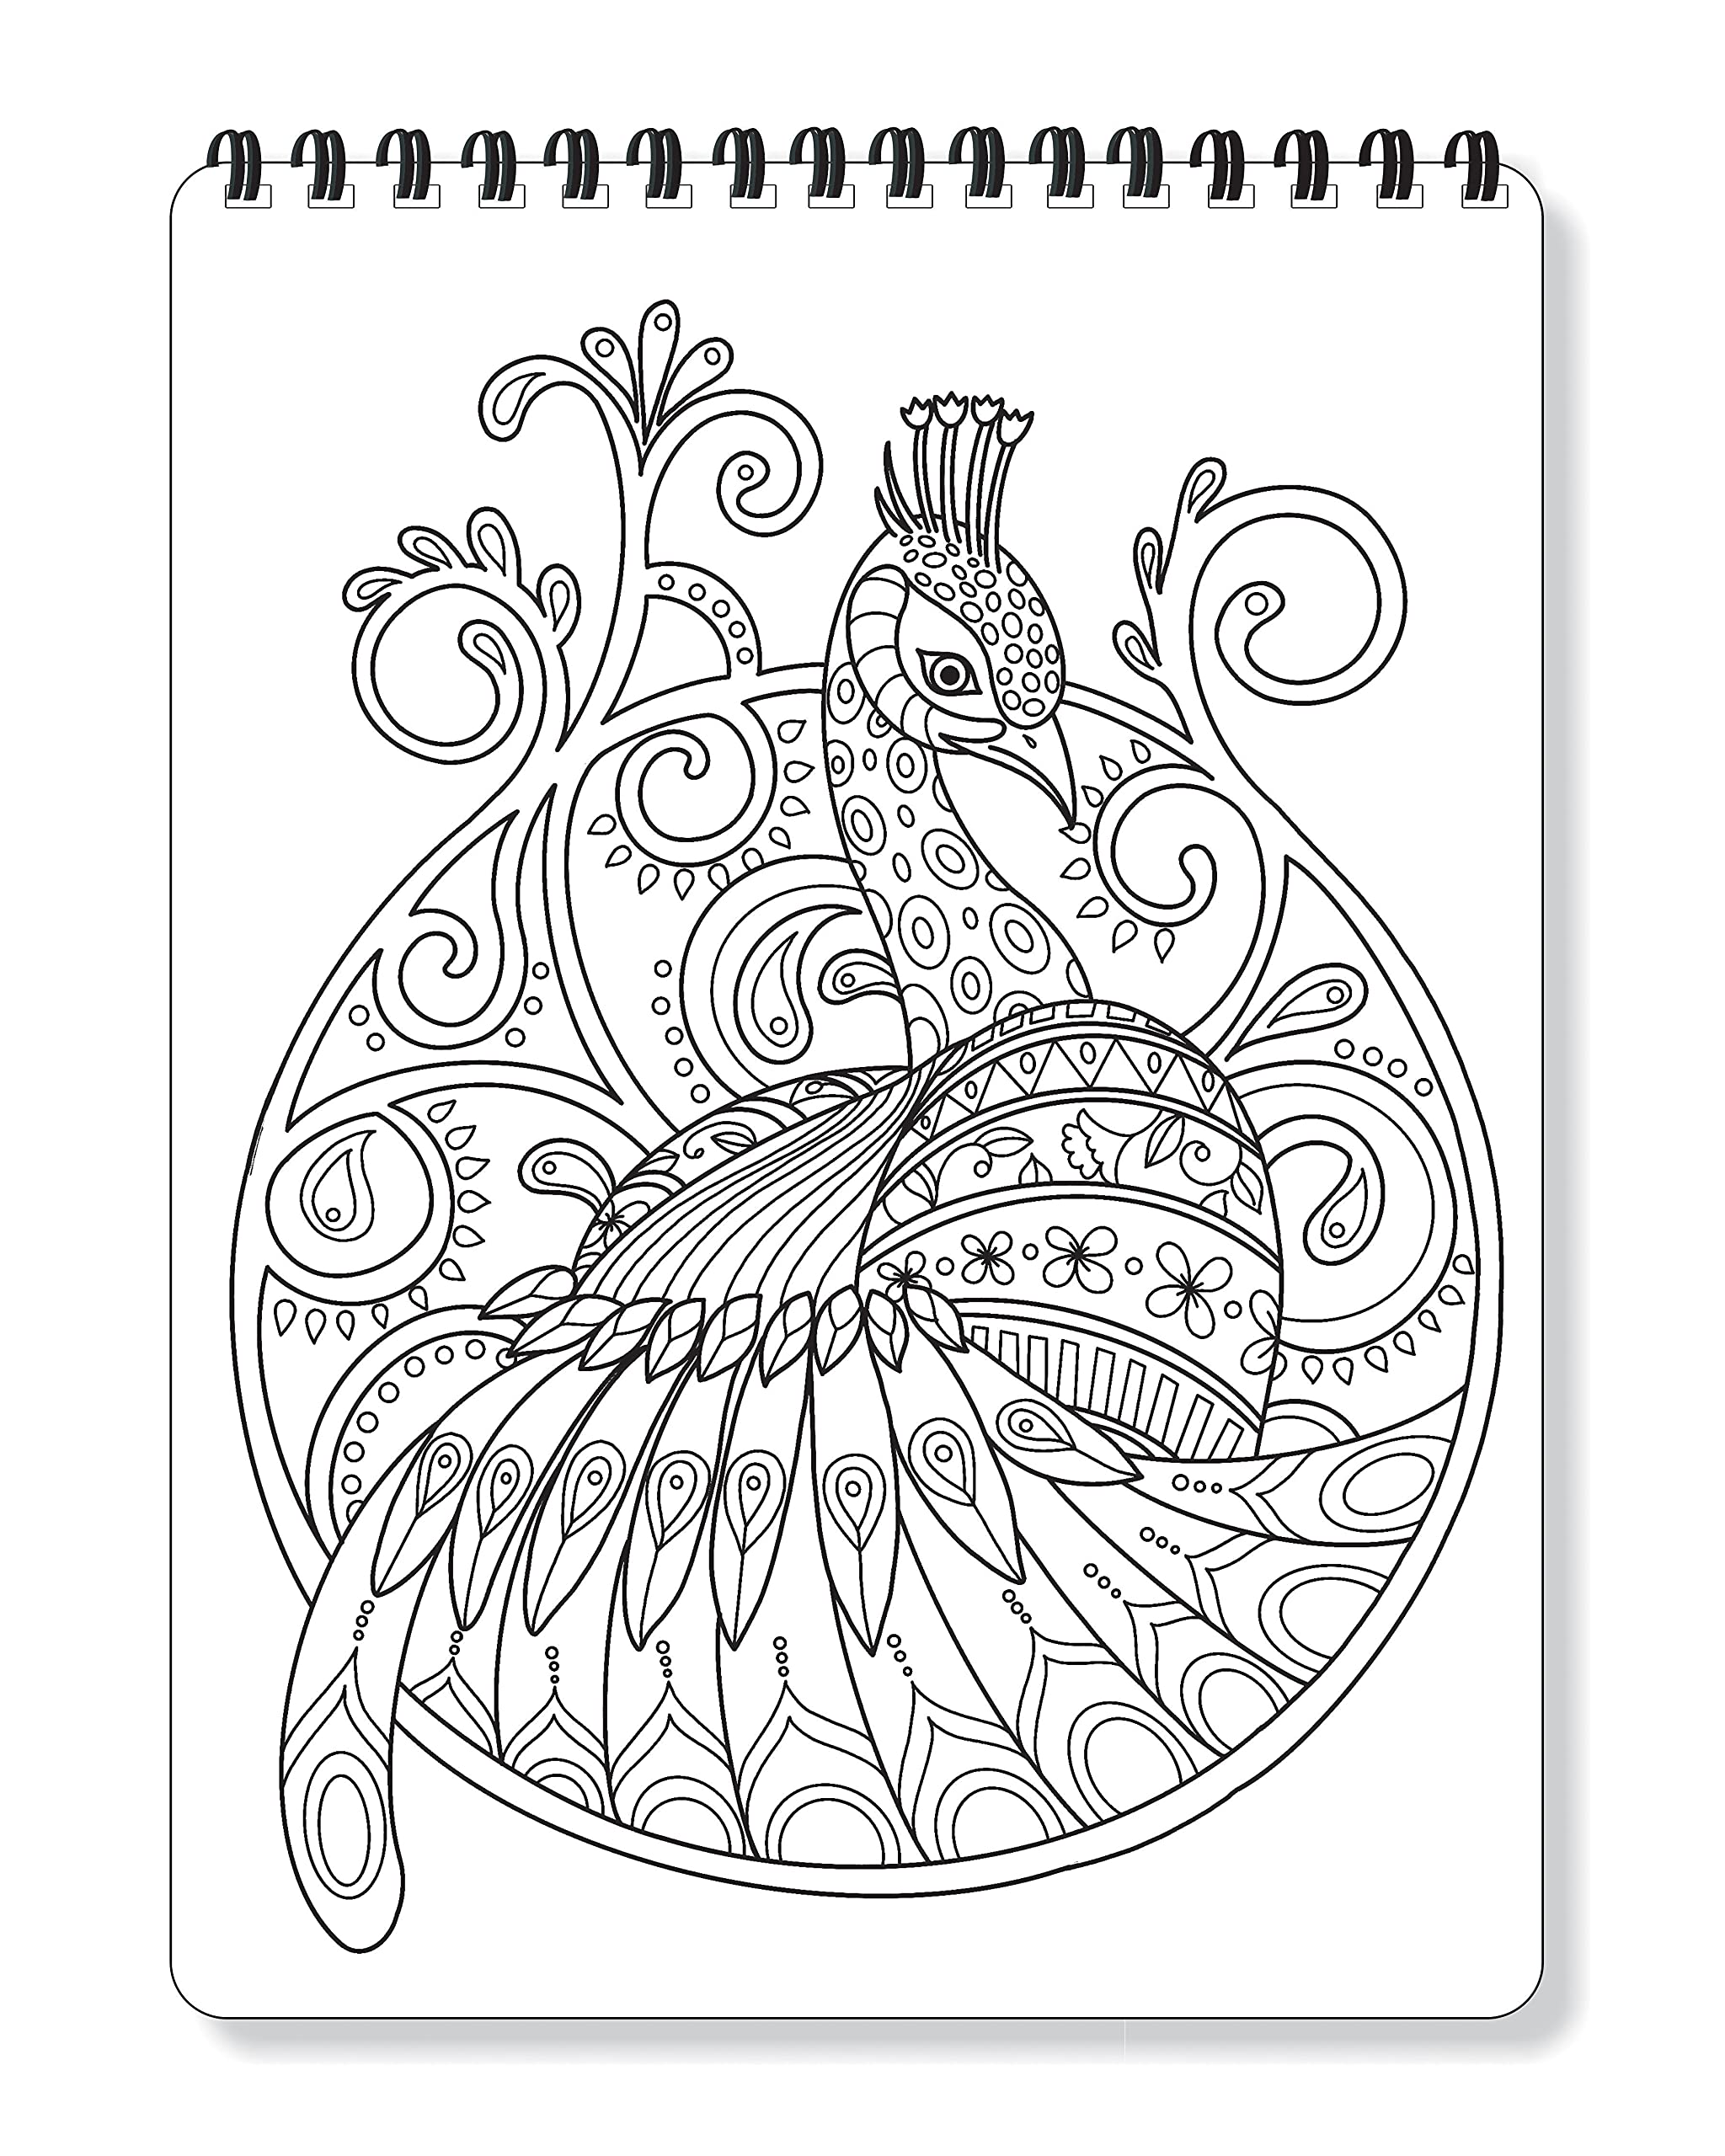 how ti draw a peacock | Peacock coloring pages, Peacock drawing, Bird  coloring pages